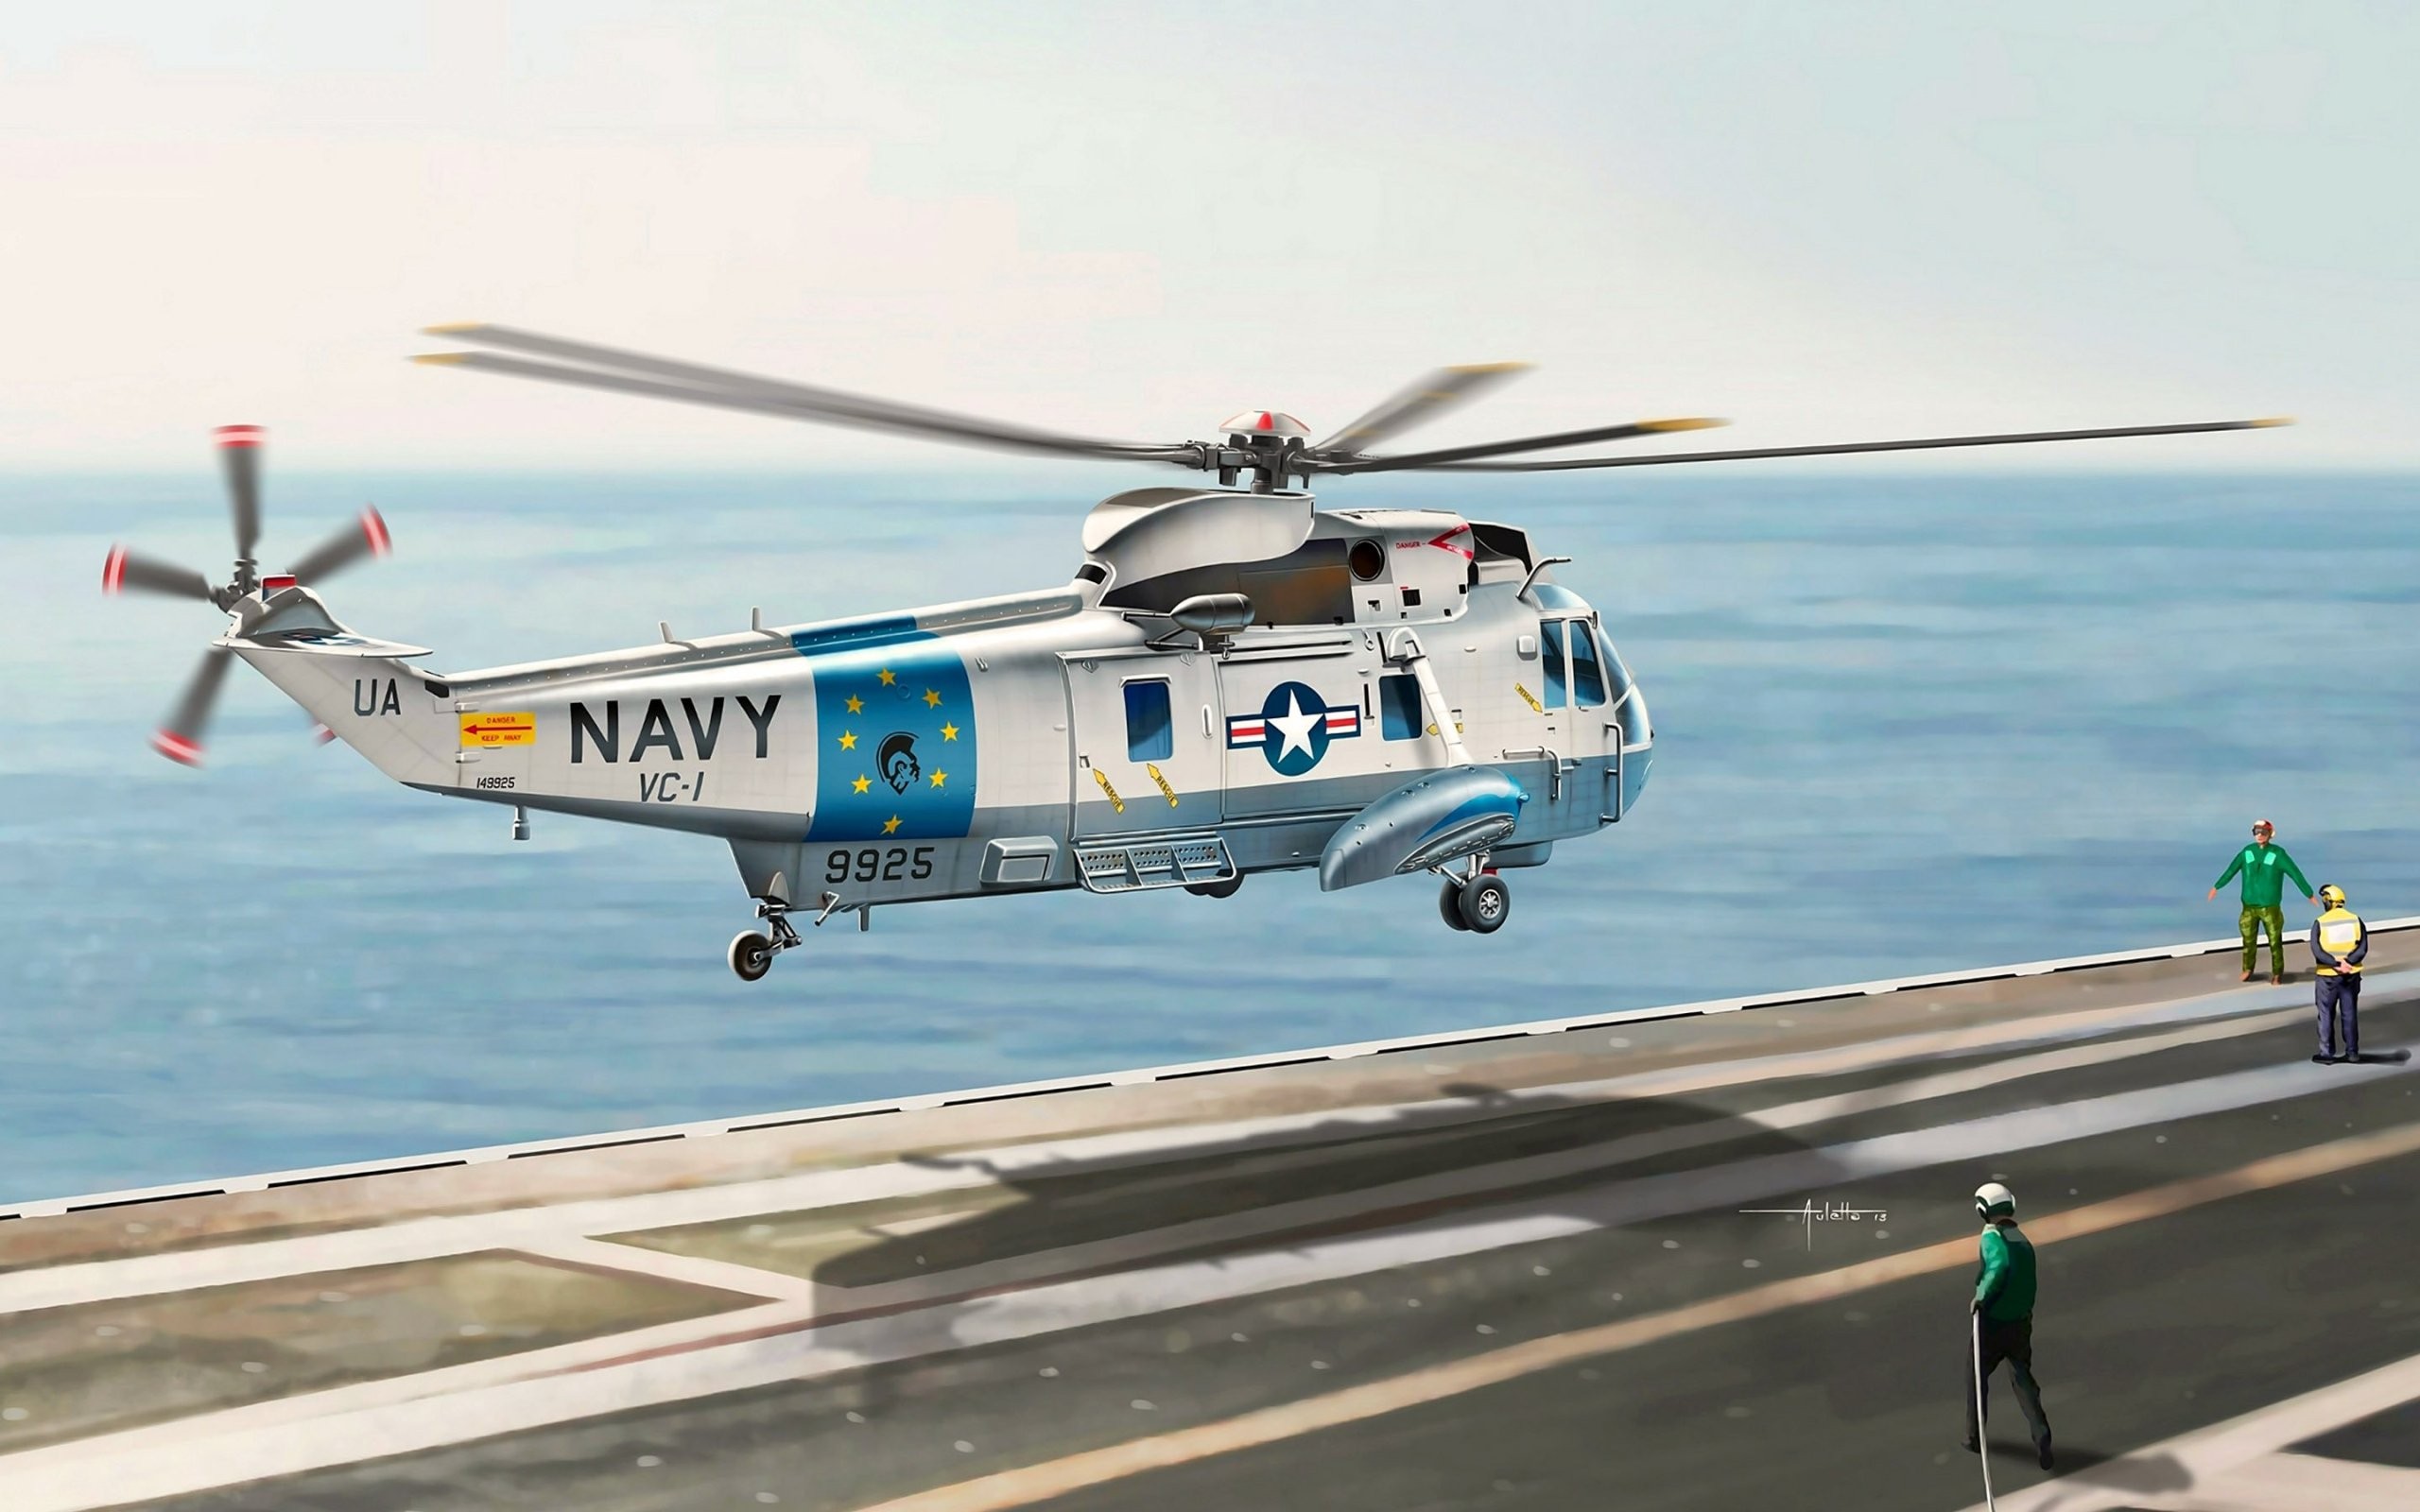 helicopters, Aircraft, Digital Art, Sikorsky SH 3 Sea King